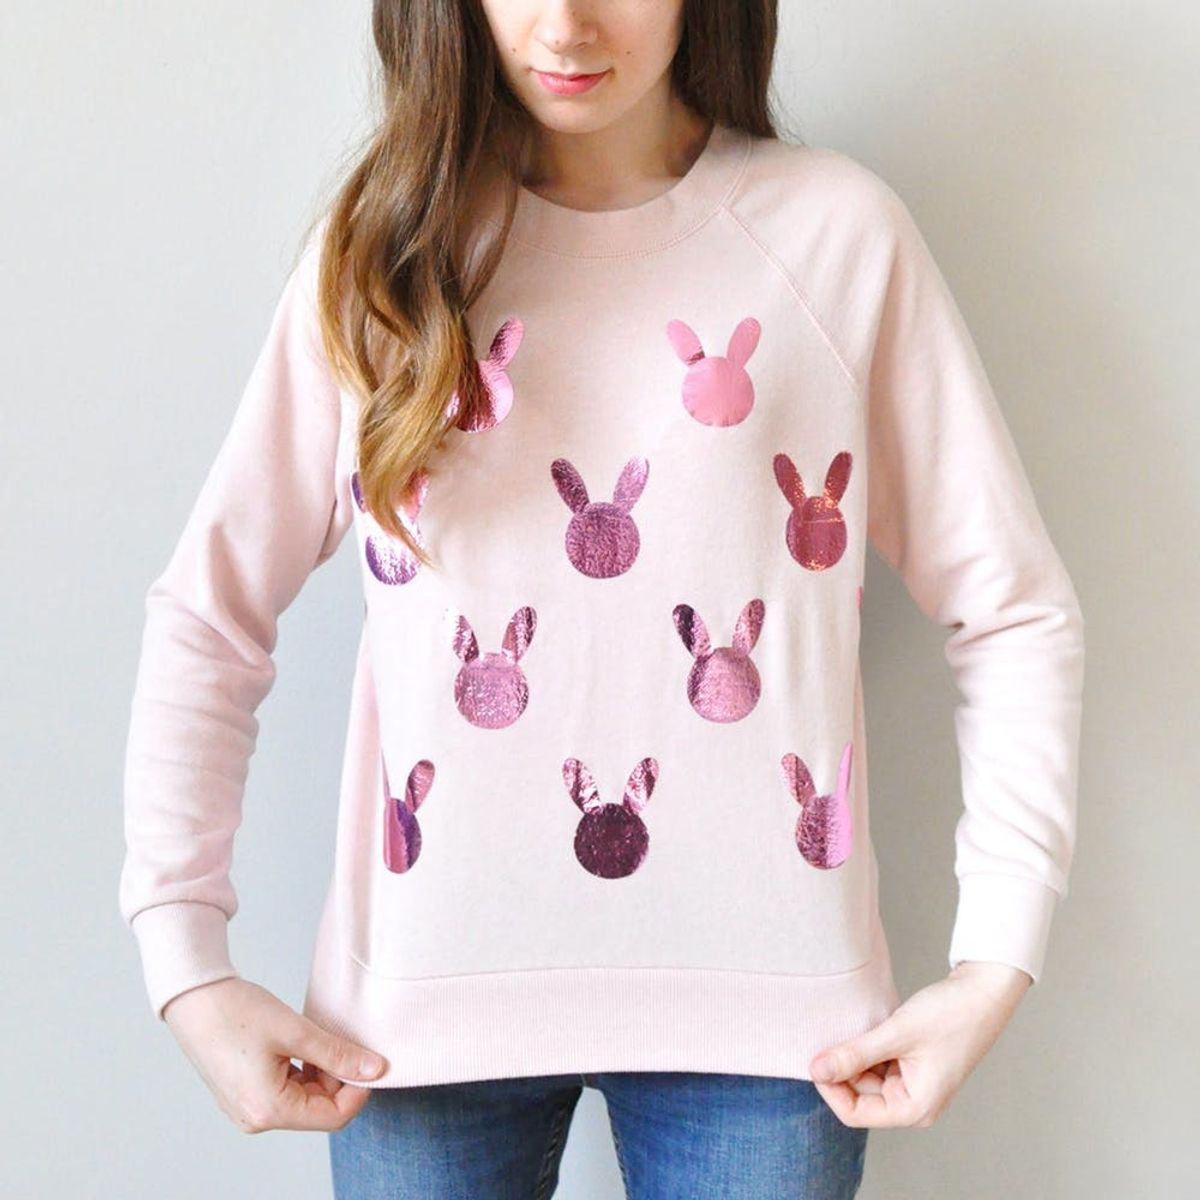 Make Your Own Metallic Pink Bunny Sweater for Easter